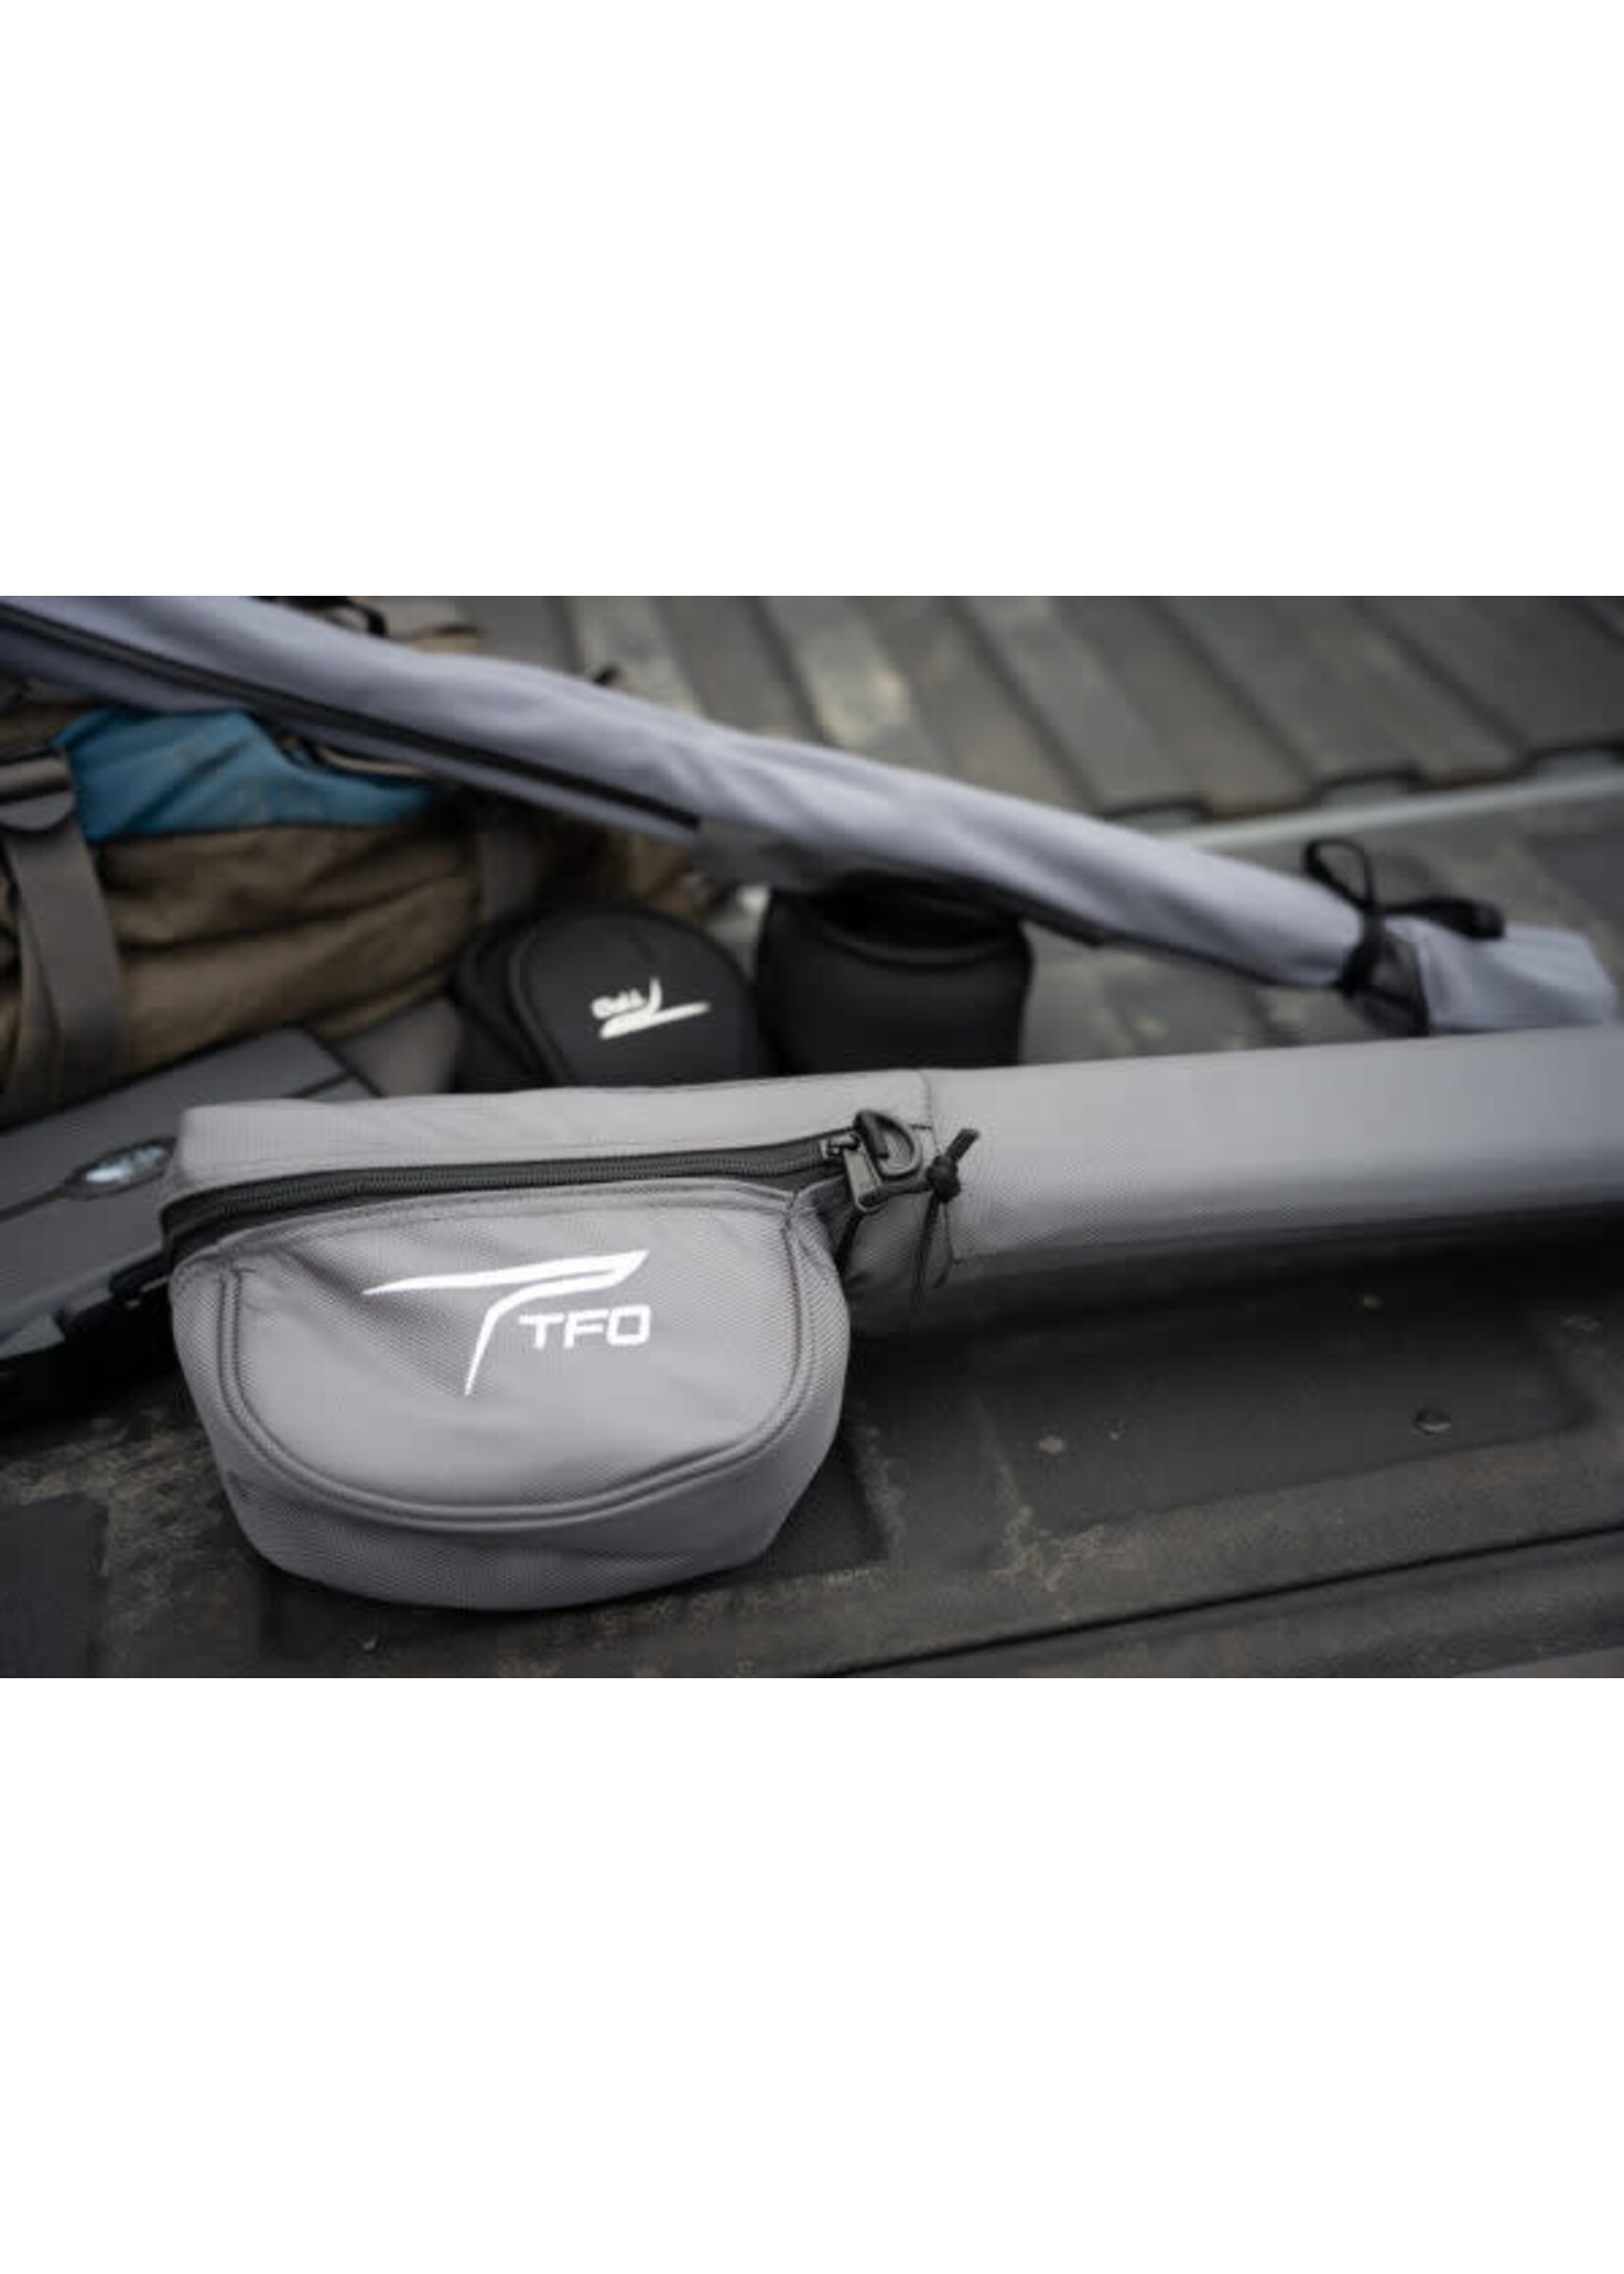 Temple Fork Outfitters TFO Rod & Reel Carriers